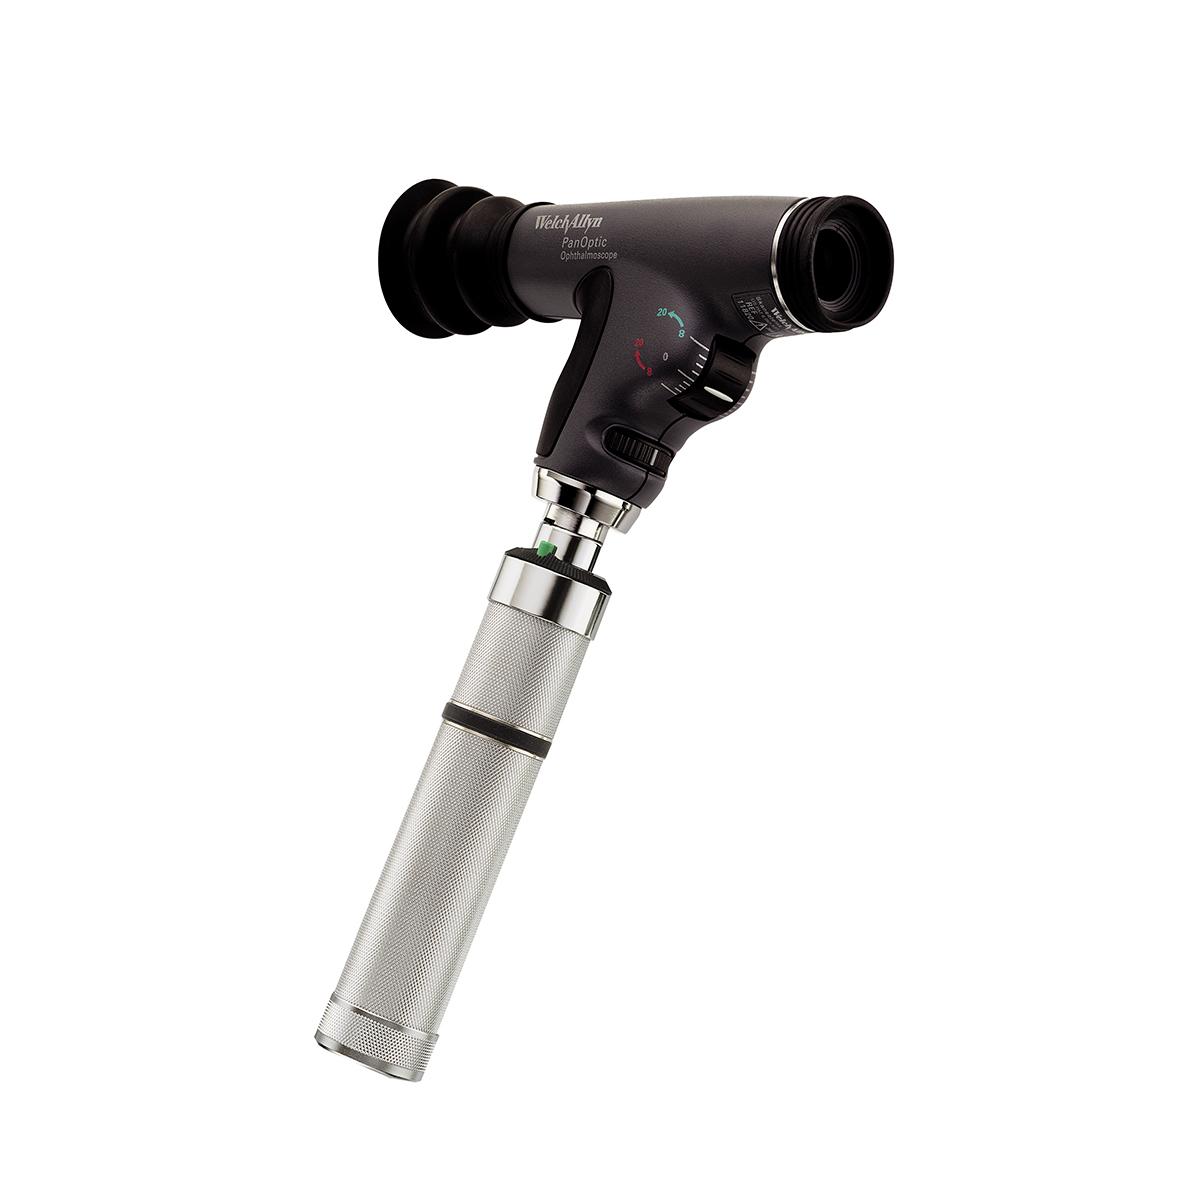 An oblique view of a Welch Allyn PanOptic Ophthalmoscope head that is attached to a stainless steel power handle.